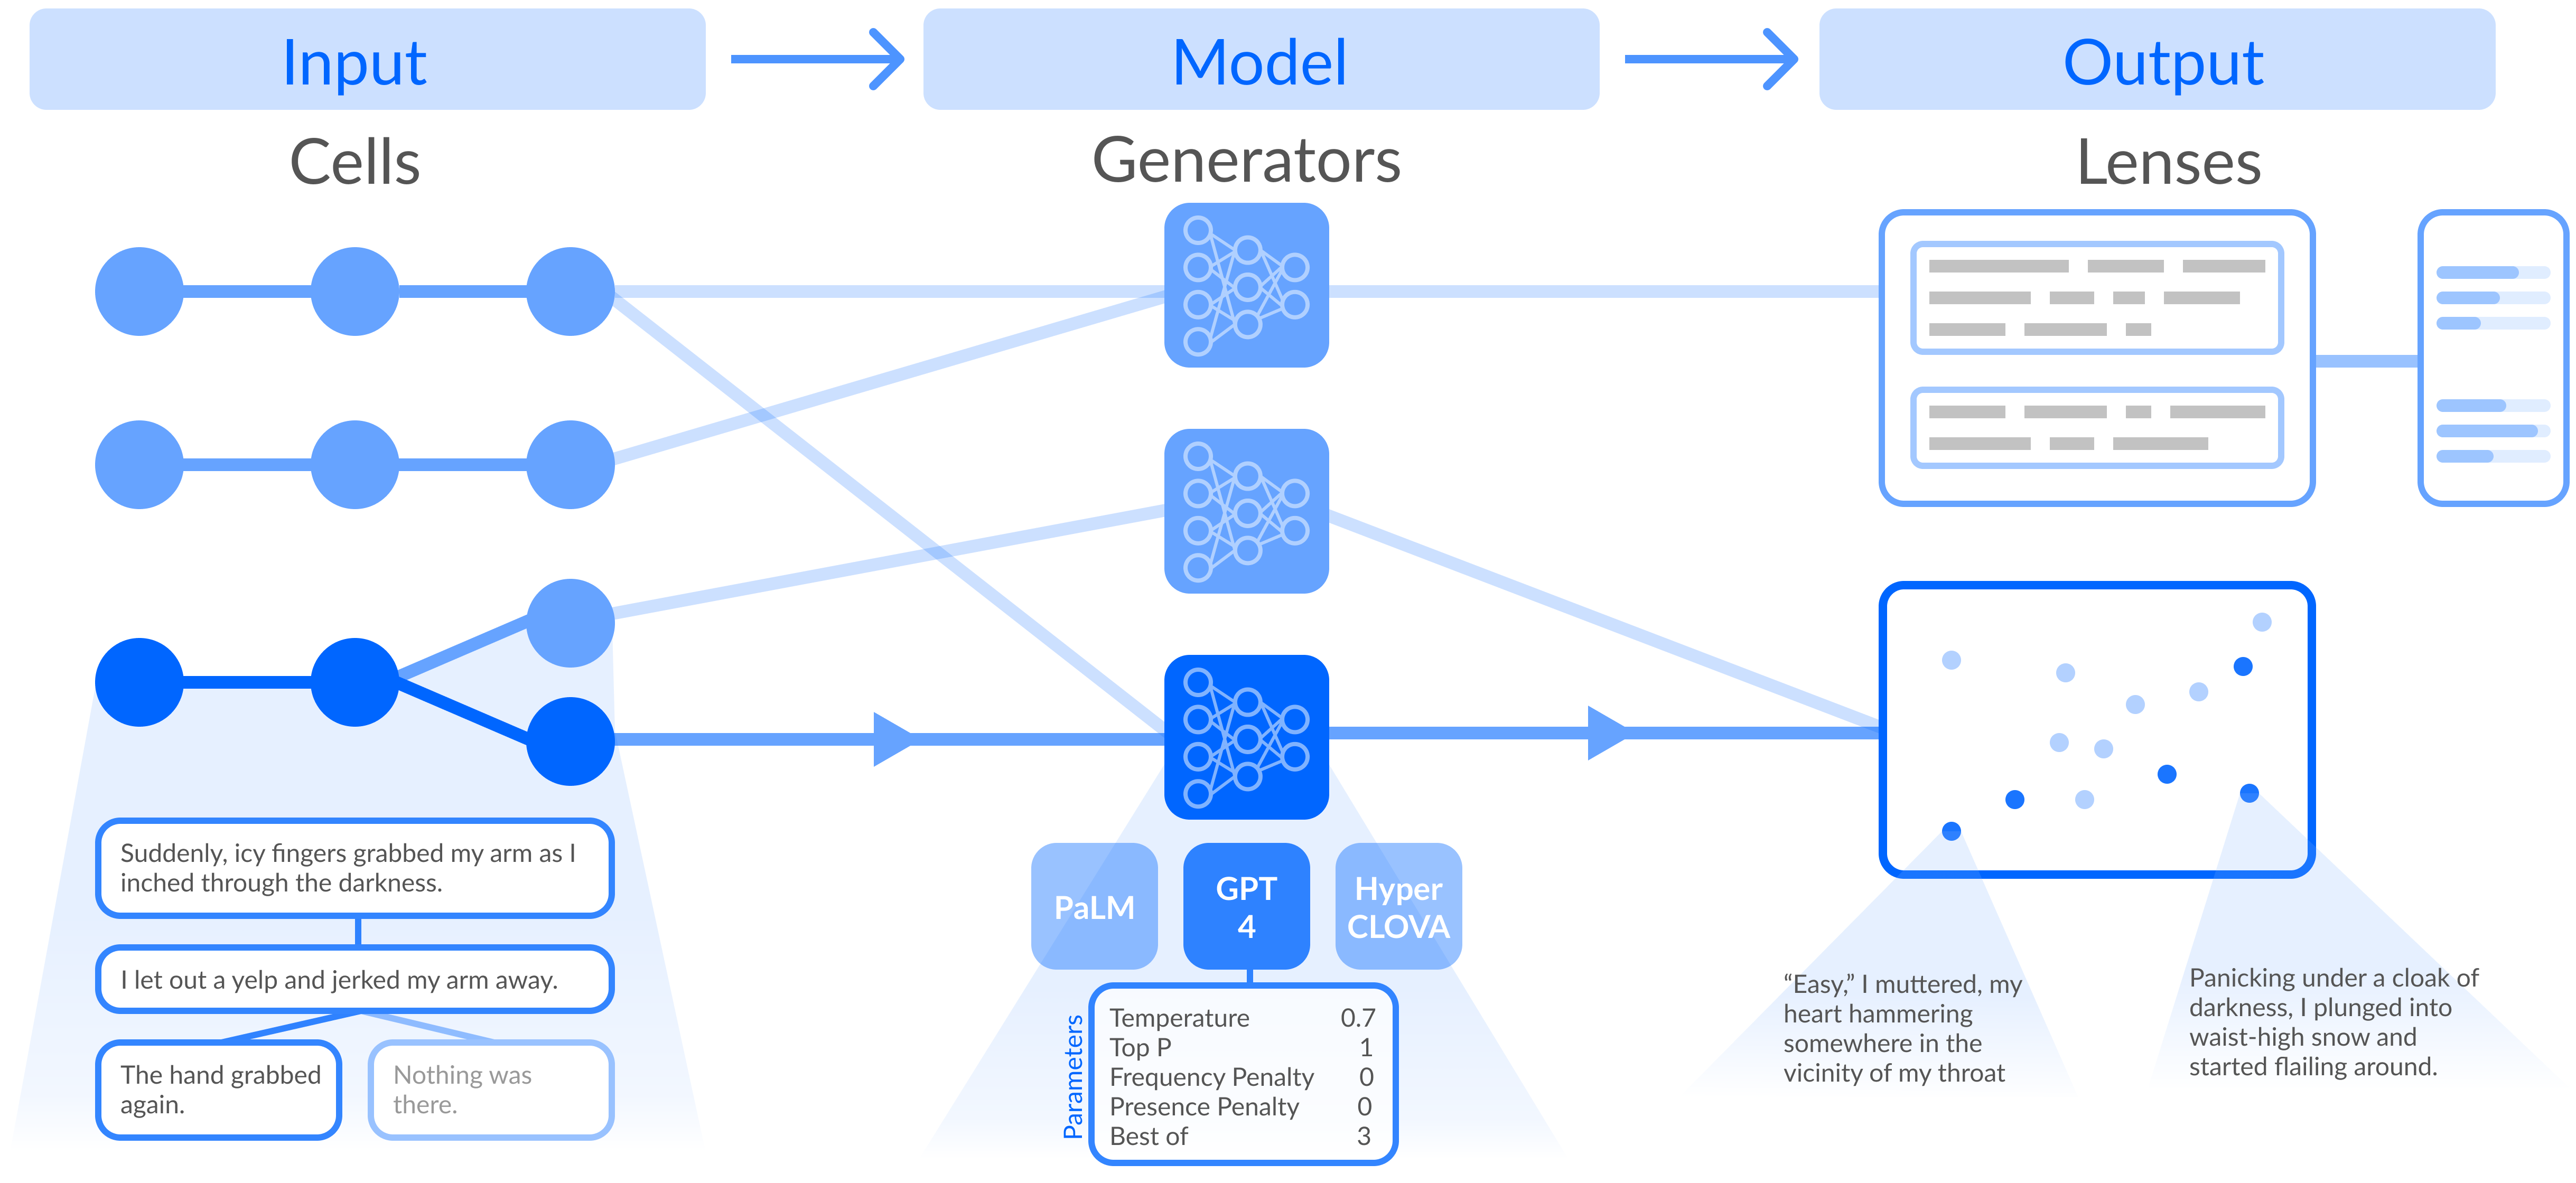 The teaser figure for the framework. Three headers are shown: Input, Model, and Output. Underneath each header there are diagrams depicting the Cells, Generators, and Lenses, respectively. Underneath Cells, dots that represent cells are shown. These dots are linked and one path of dots is highlighted with text for that path also displayed underneath the path. Underneath Model, rectangles that represent generators are displayed and these generators are connected with lines to the dots. One generator is highlighted with information about the model underneath it (i.e., GPT-4 model and its parameters). Underneath Lenses, three summarized representations of lenses are displayed: a list lens that shows generations as a list of text, a ratings lens that show ratings in bars, and a space lens that shows the generations as dots in a 2D space. These lenses are linked to the generators with lines.